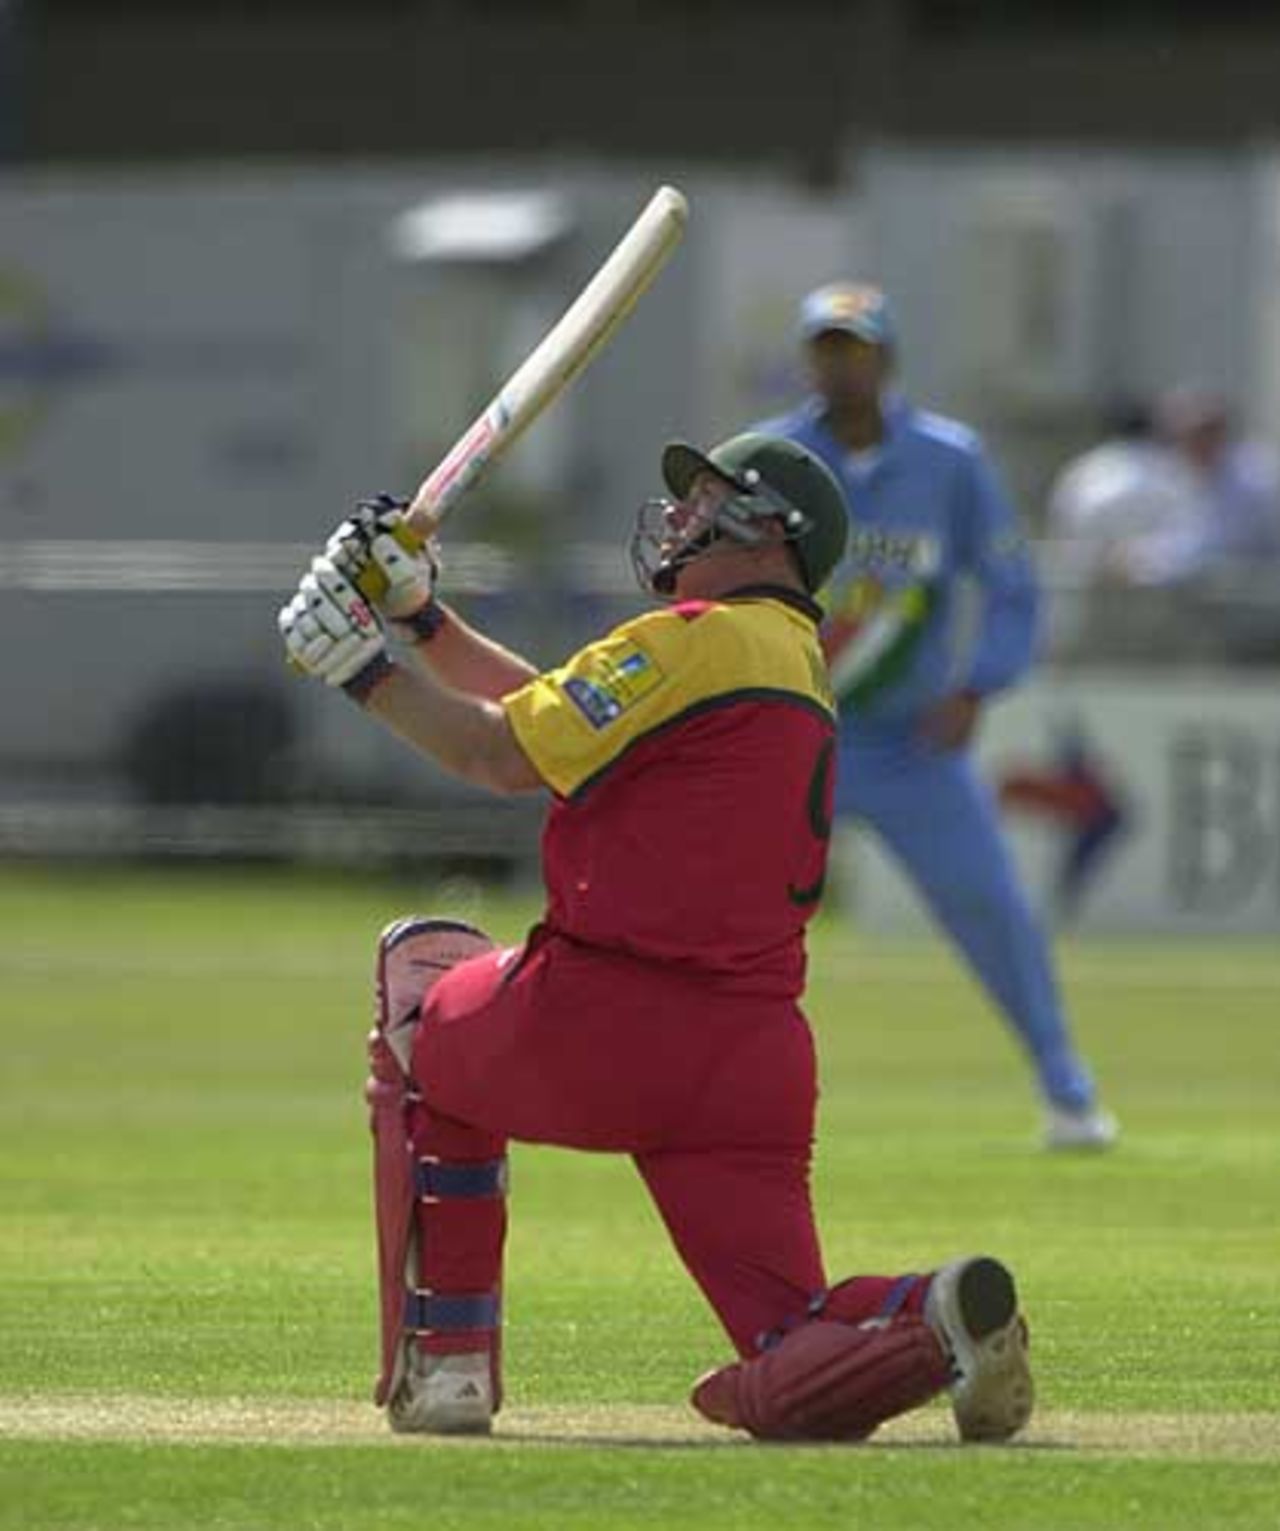 Leics opener Trevor Ward hoists a six off the bowling of Ganguly, Leicestershire v Indians 26th June 2002